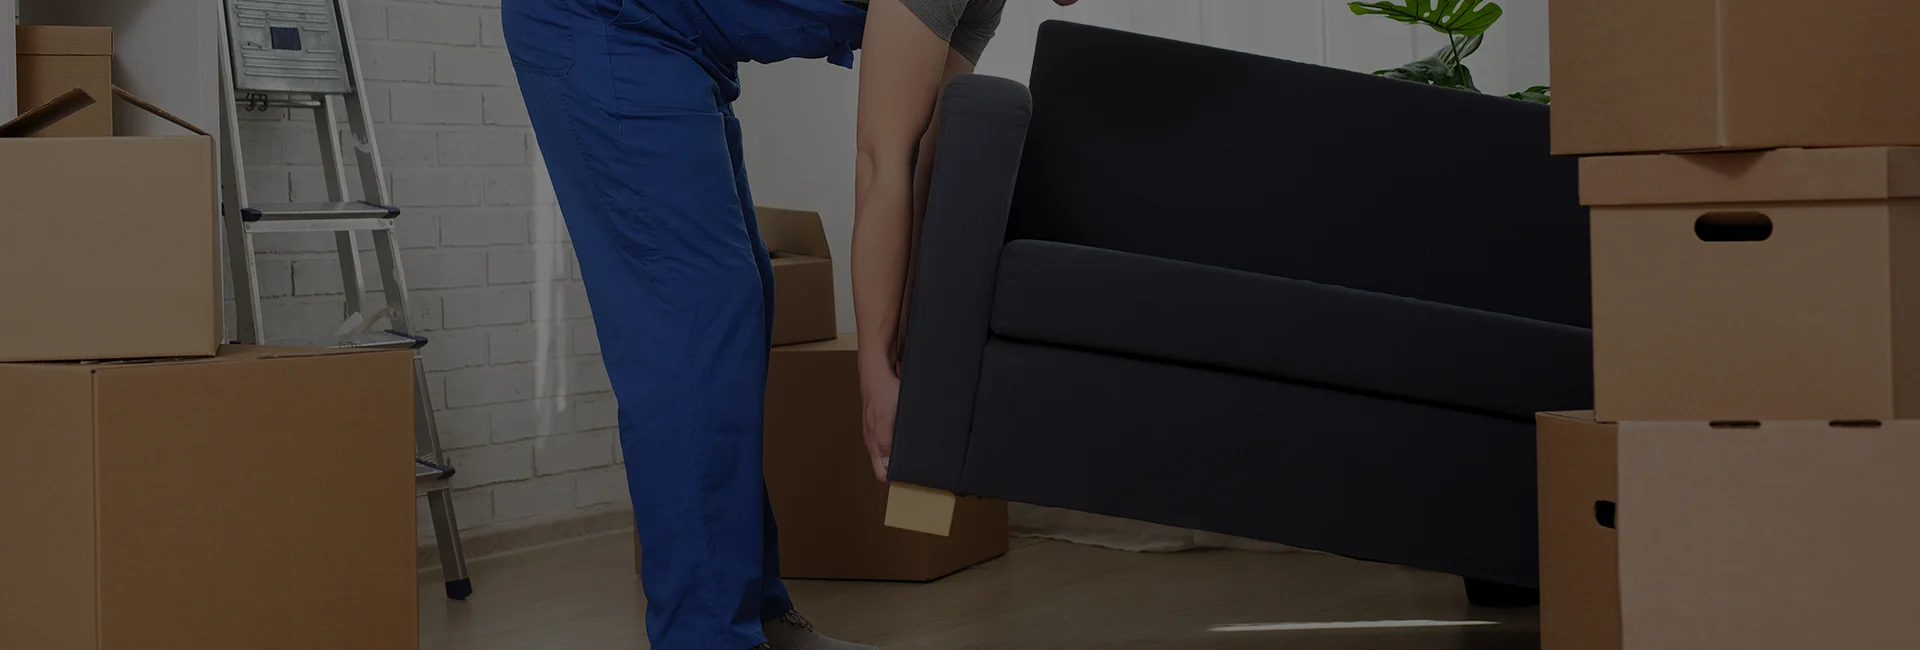 10 Moving Mistakes You Must Avoid When Relocating Furniture - Earthrelo